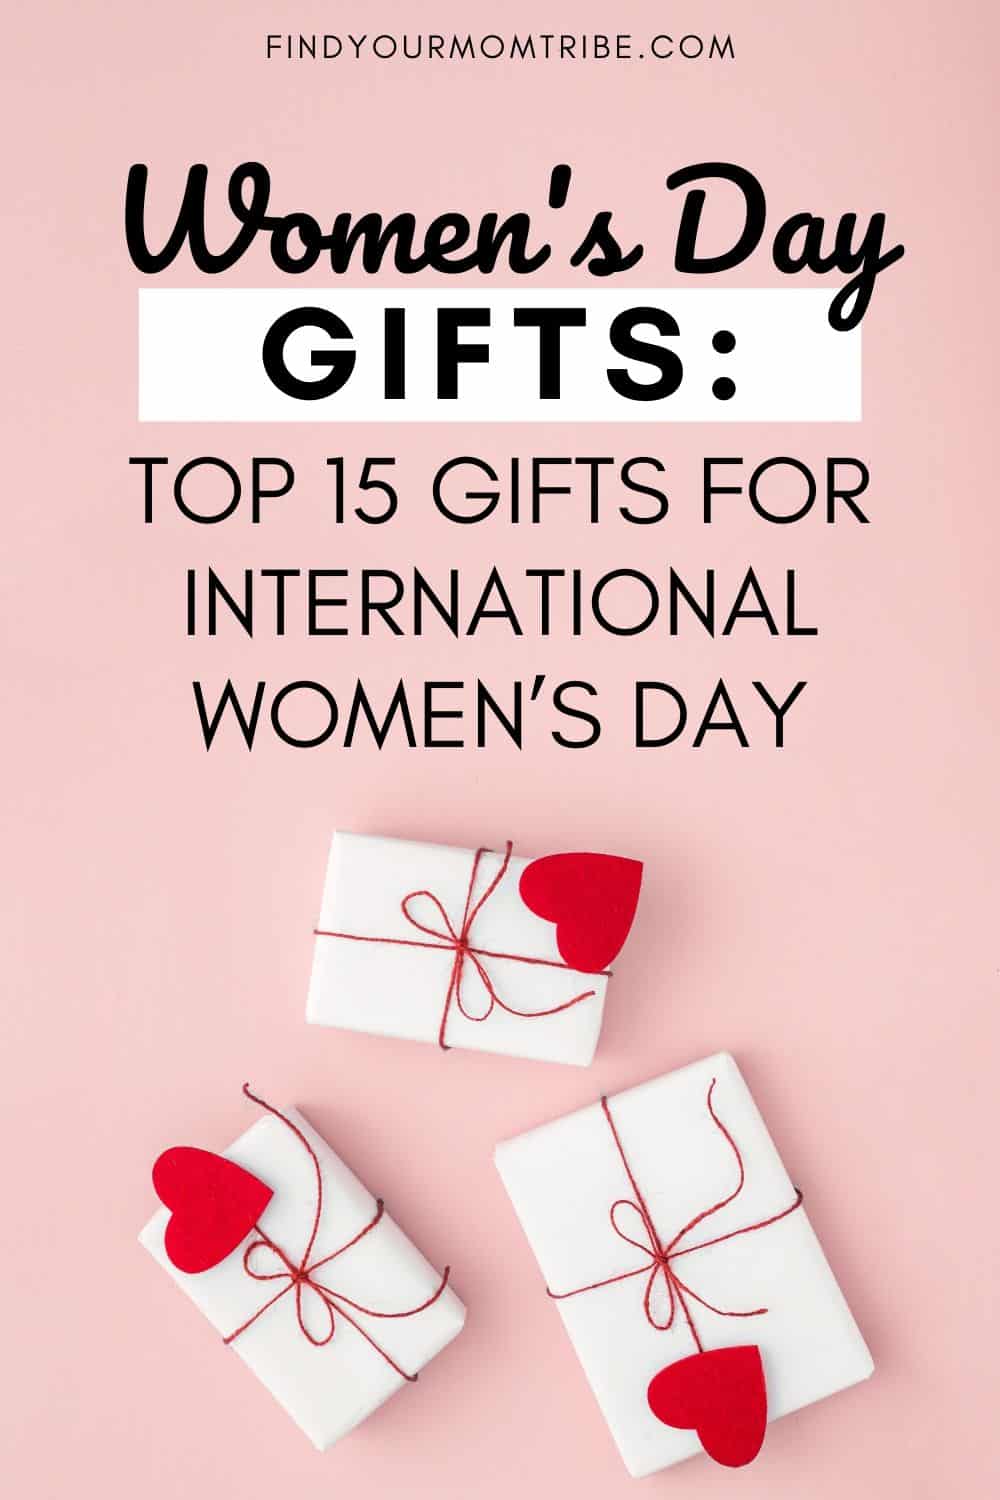 Women’s Day Gifts: Top 15 Gifts For International Women’s Day